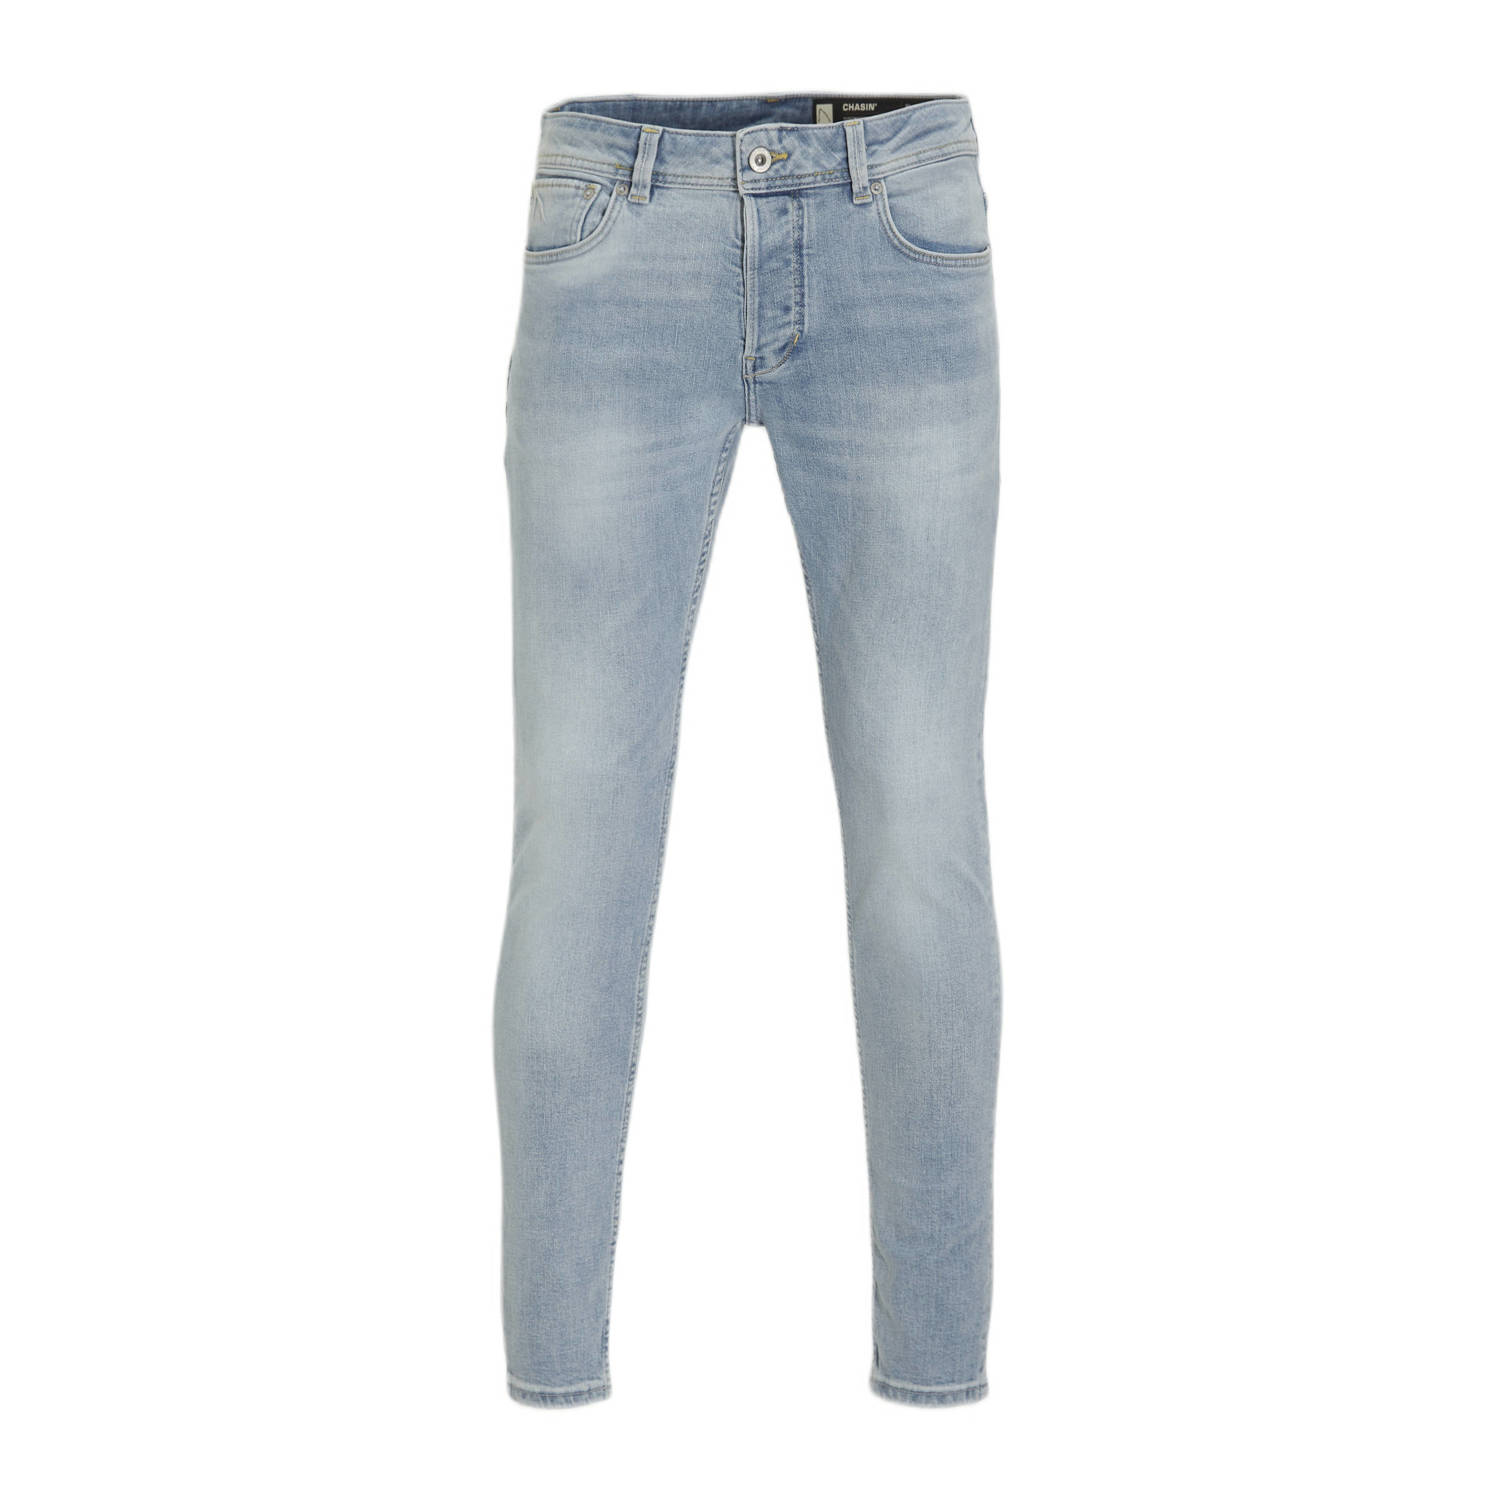 CHASIN' slim fit jeans EGO Canyon lichtblauw